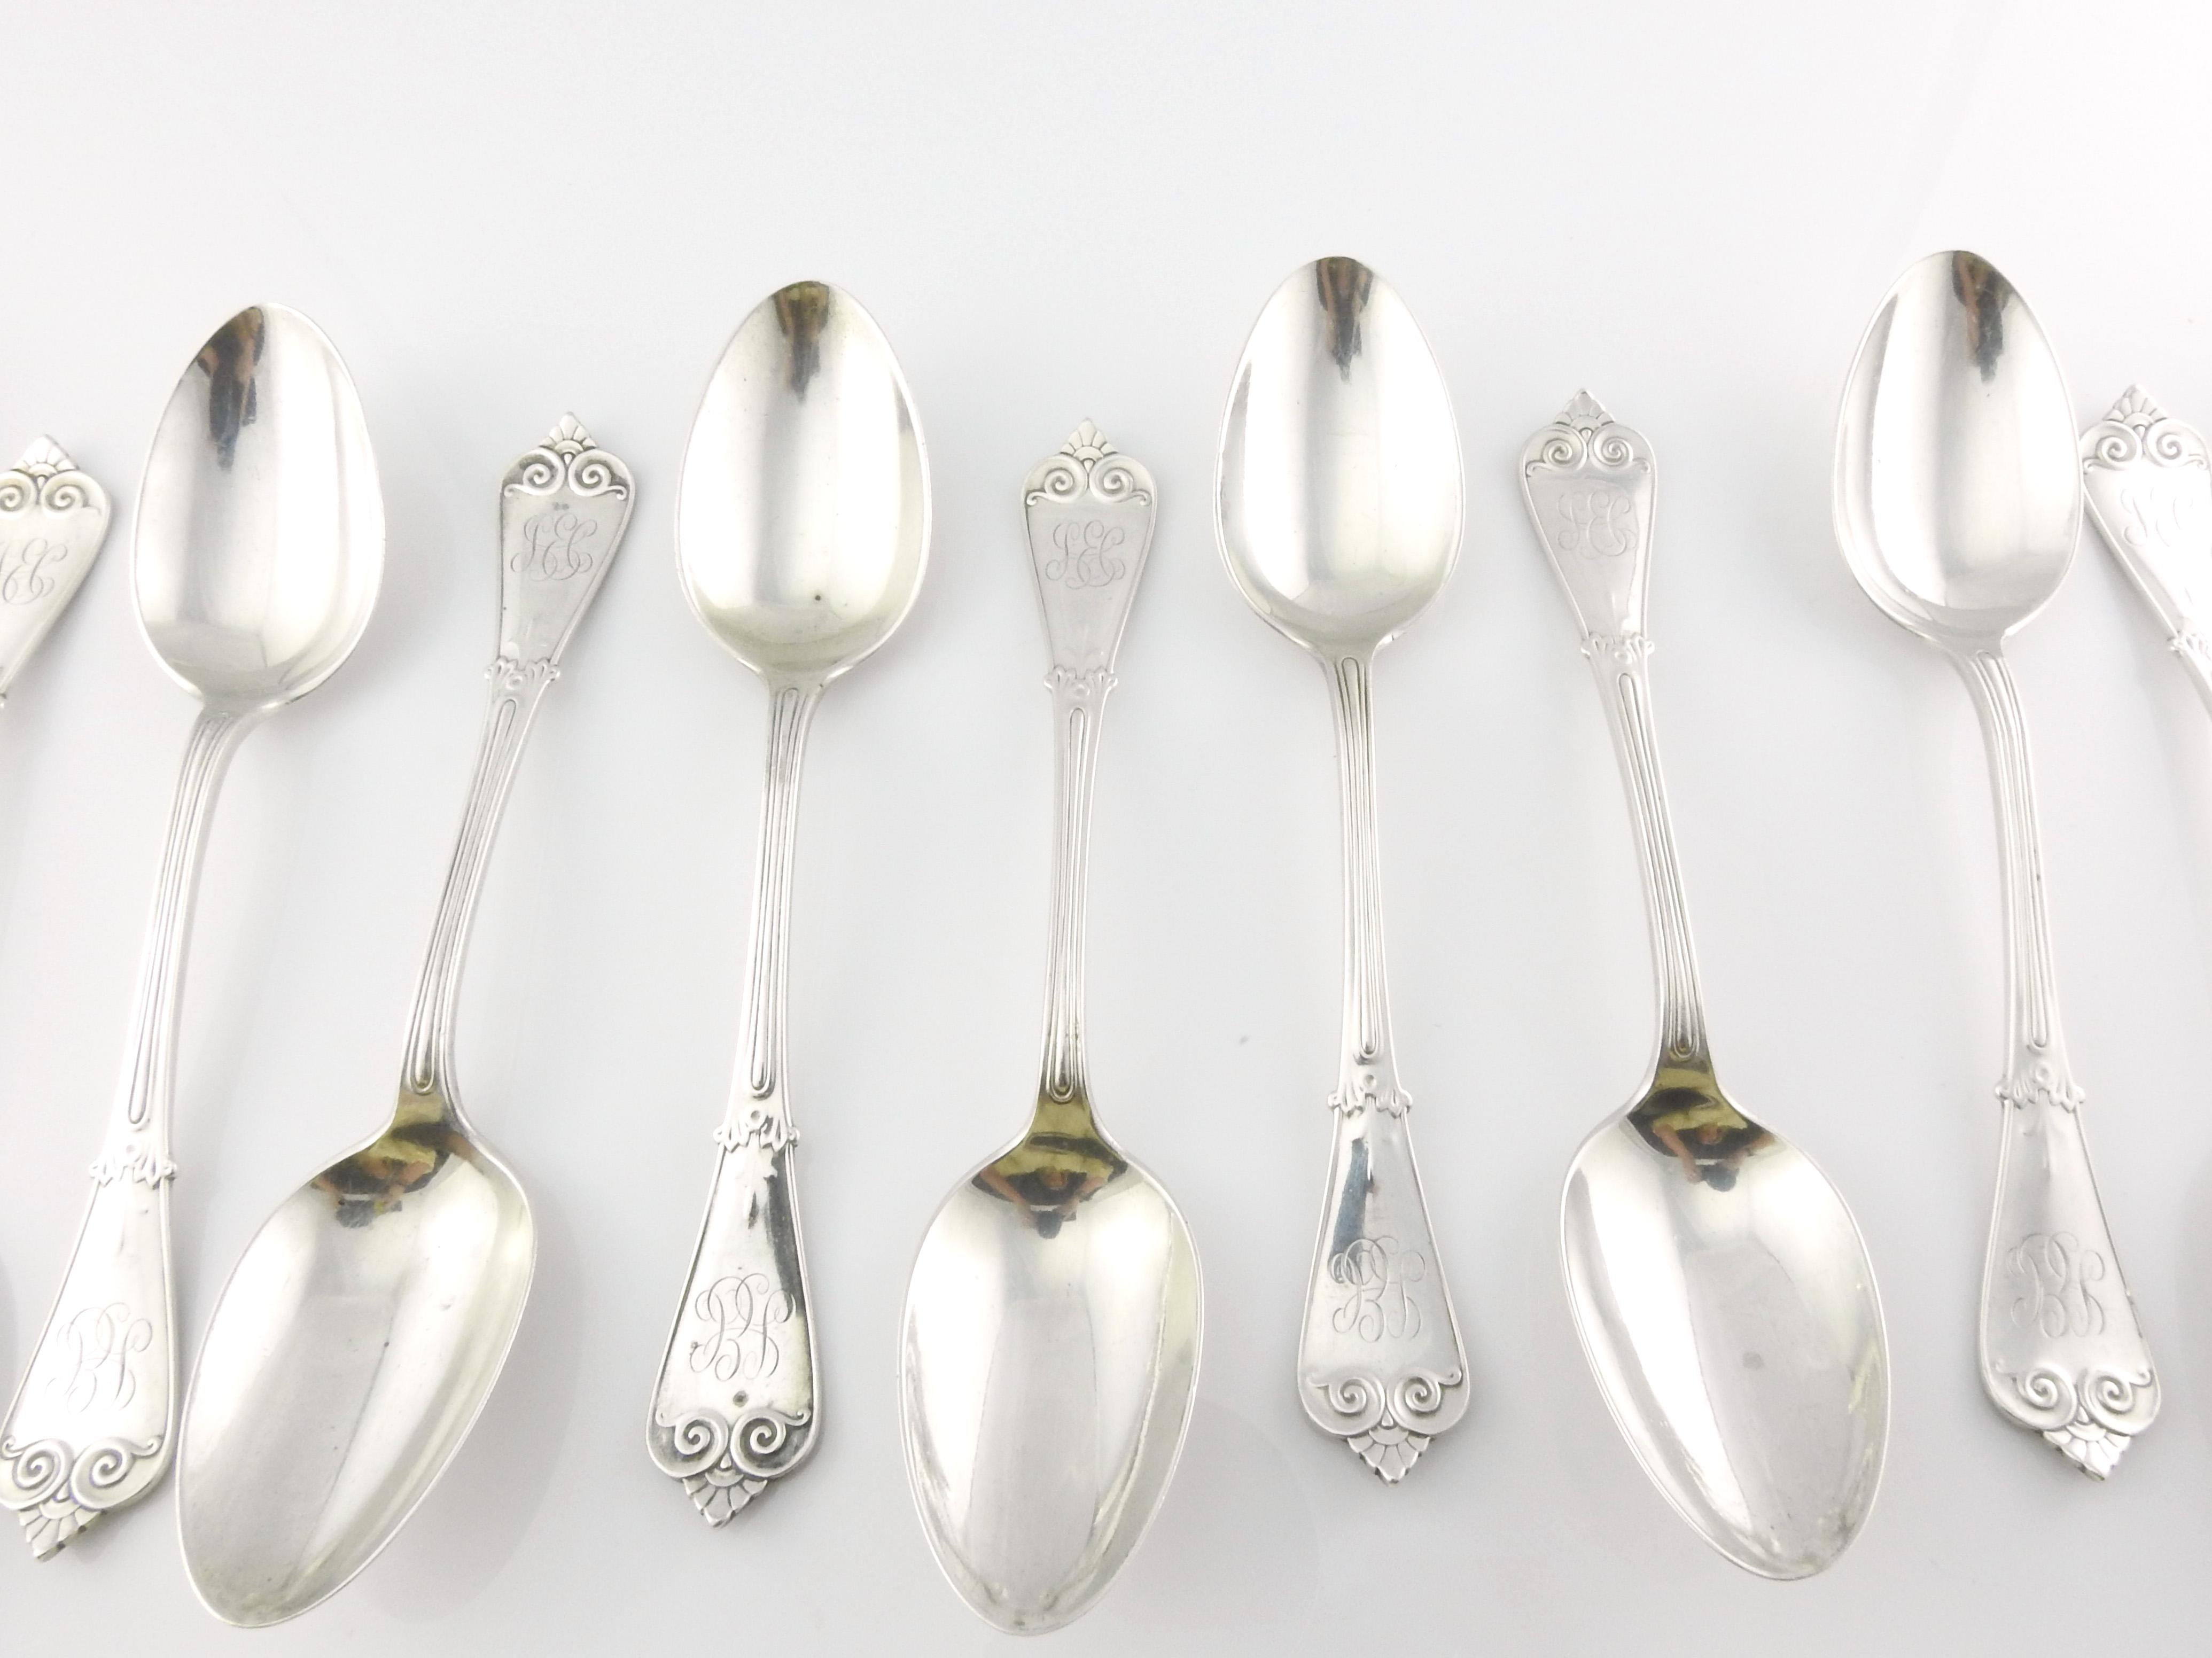 Set of 11 Tiffany & Co. solid sterling silver oval soup spoons in the Beekman pattern.

Marked: TIFFANY & CO STERLING PAT 1896

Monogram appears to be JEC

Each spoon measures: 7